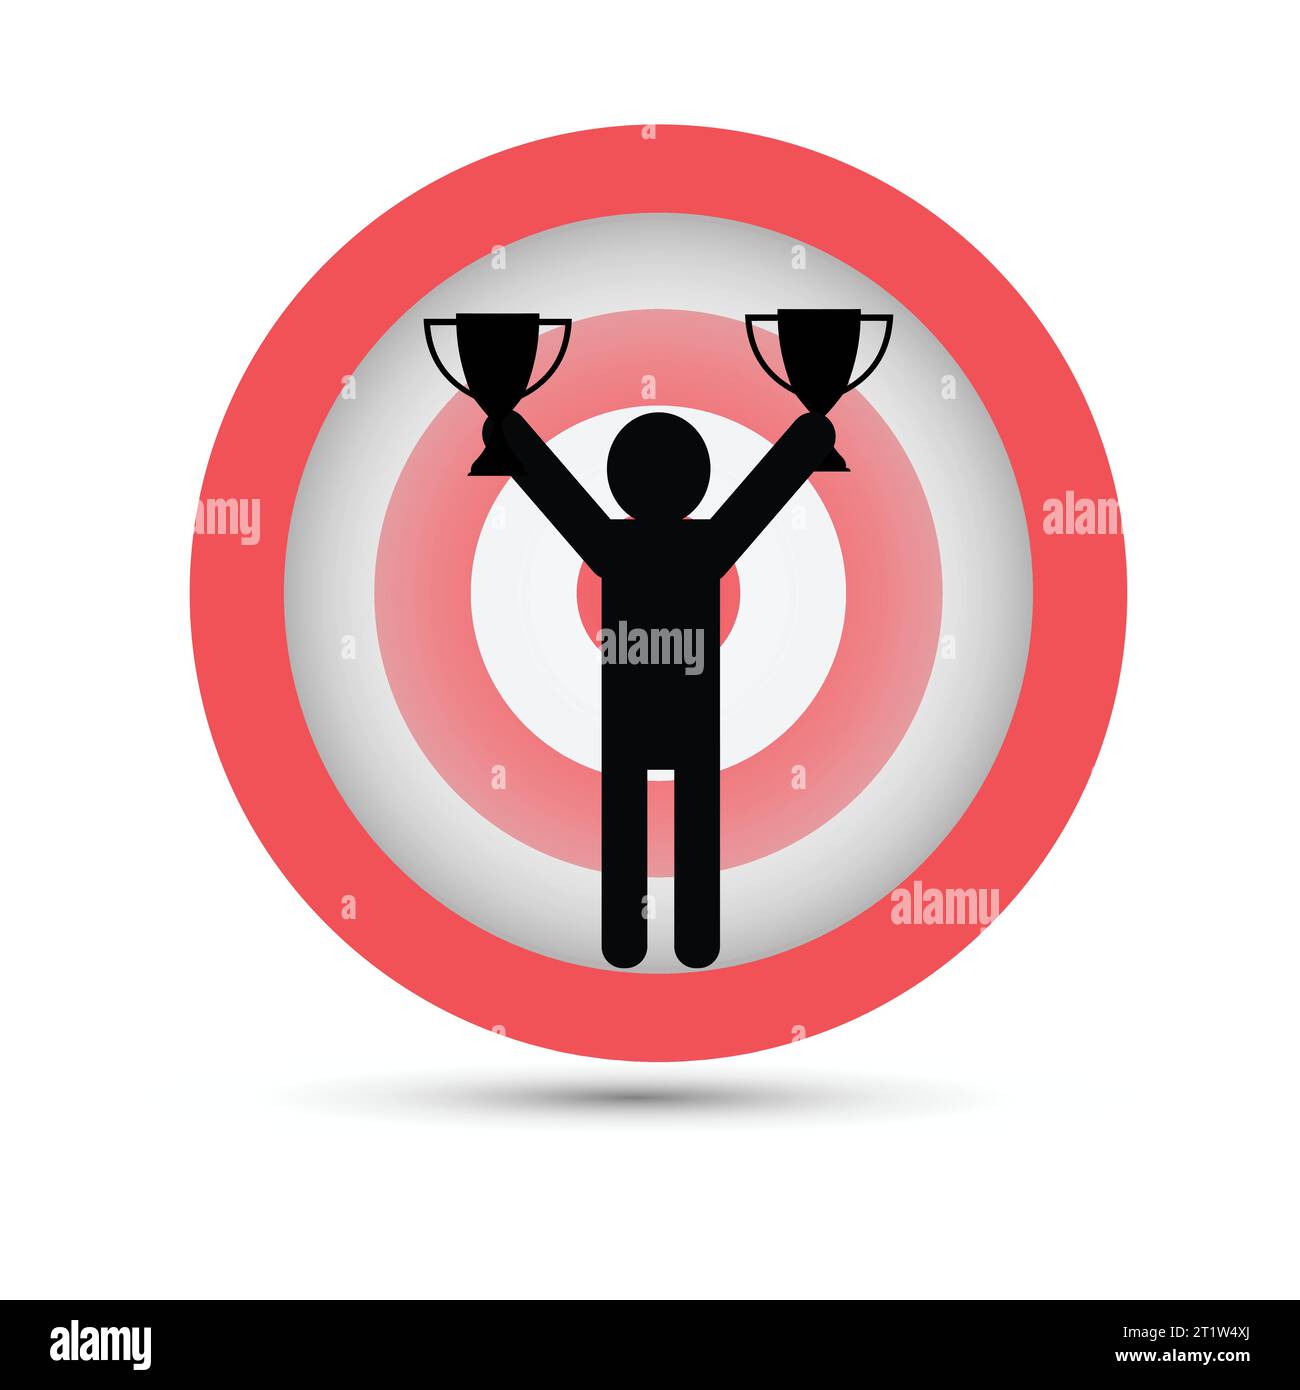 Silhouette of a man holding two cups on a target Stock Vector